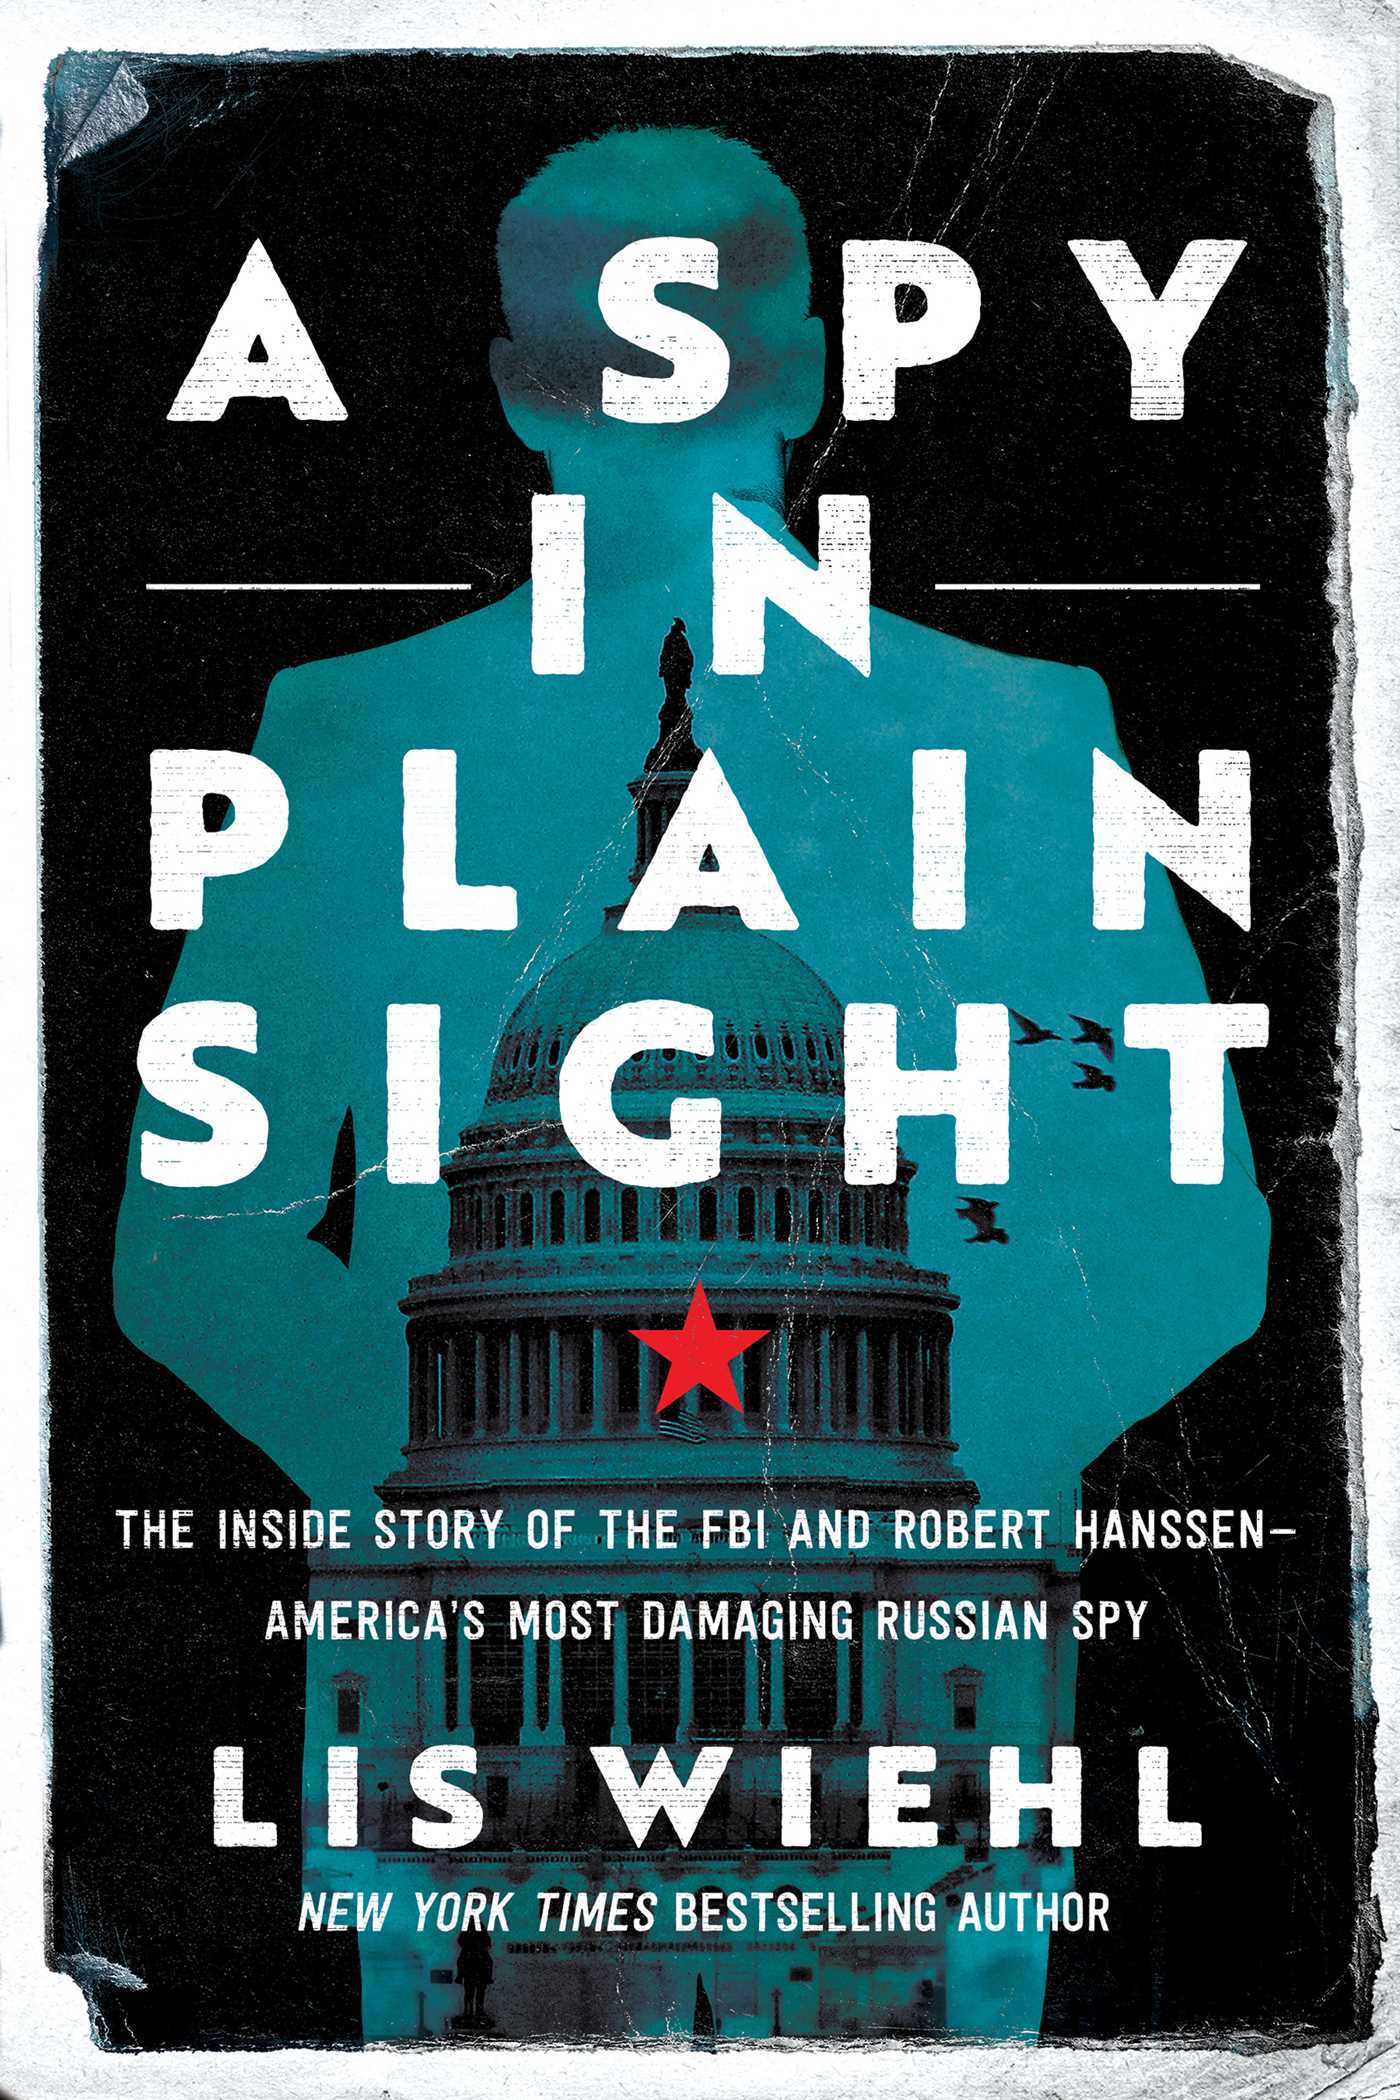 Book cover with title text over silhouette of man, US Capitol building, and red star.